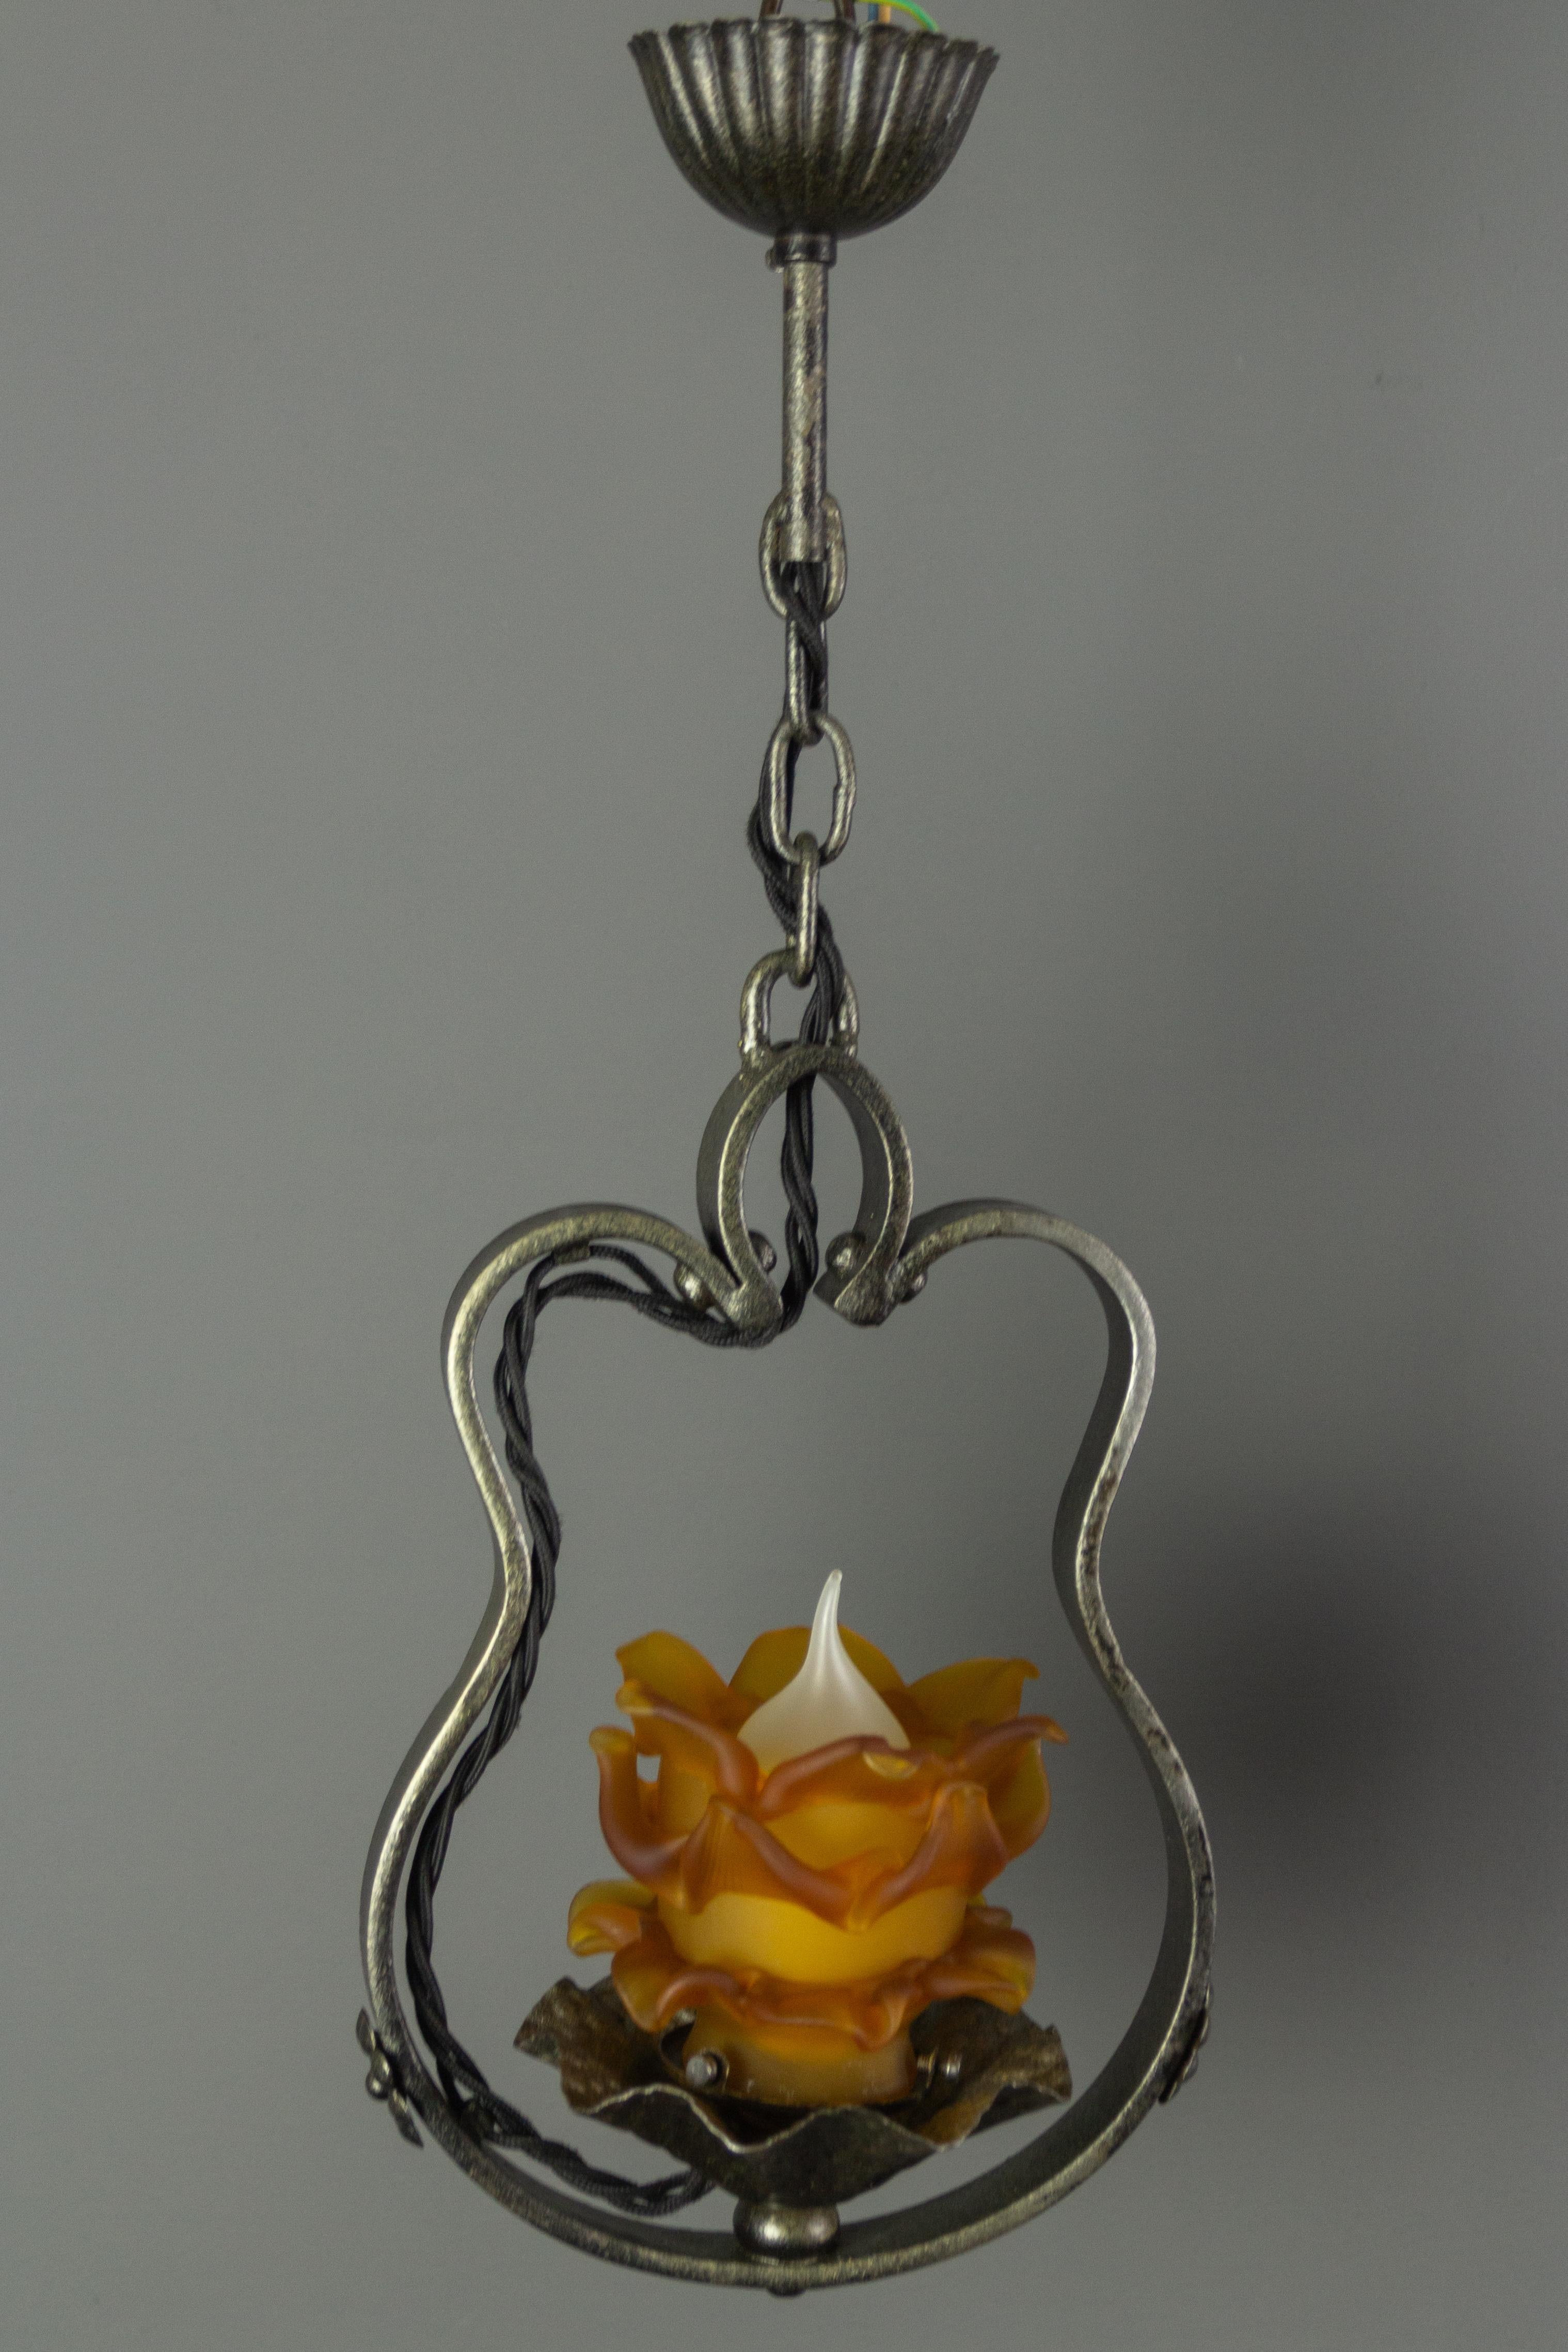 Pair of French Wrought Iron and Orange Glass Flower Shaped Pendant Lights 1